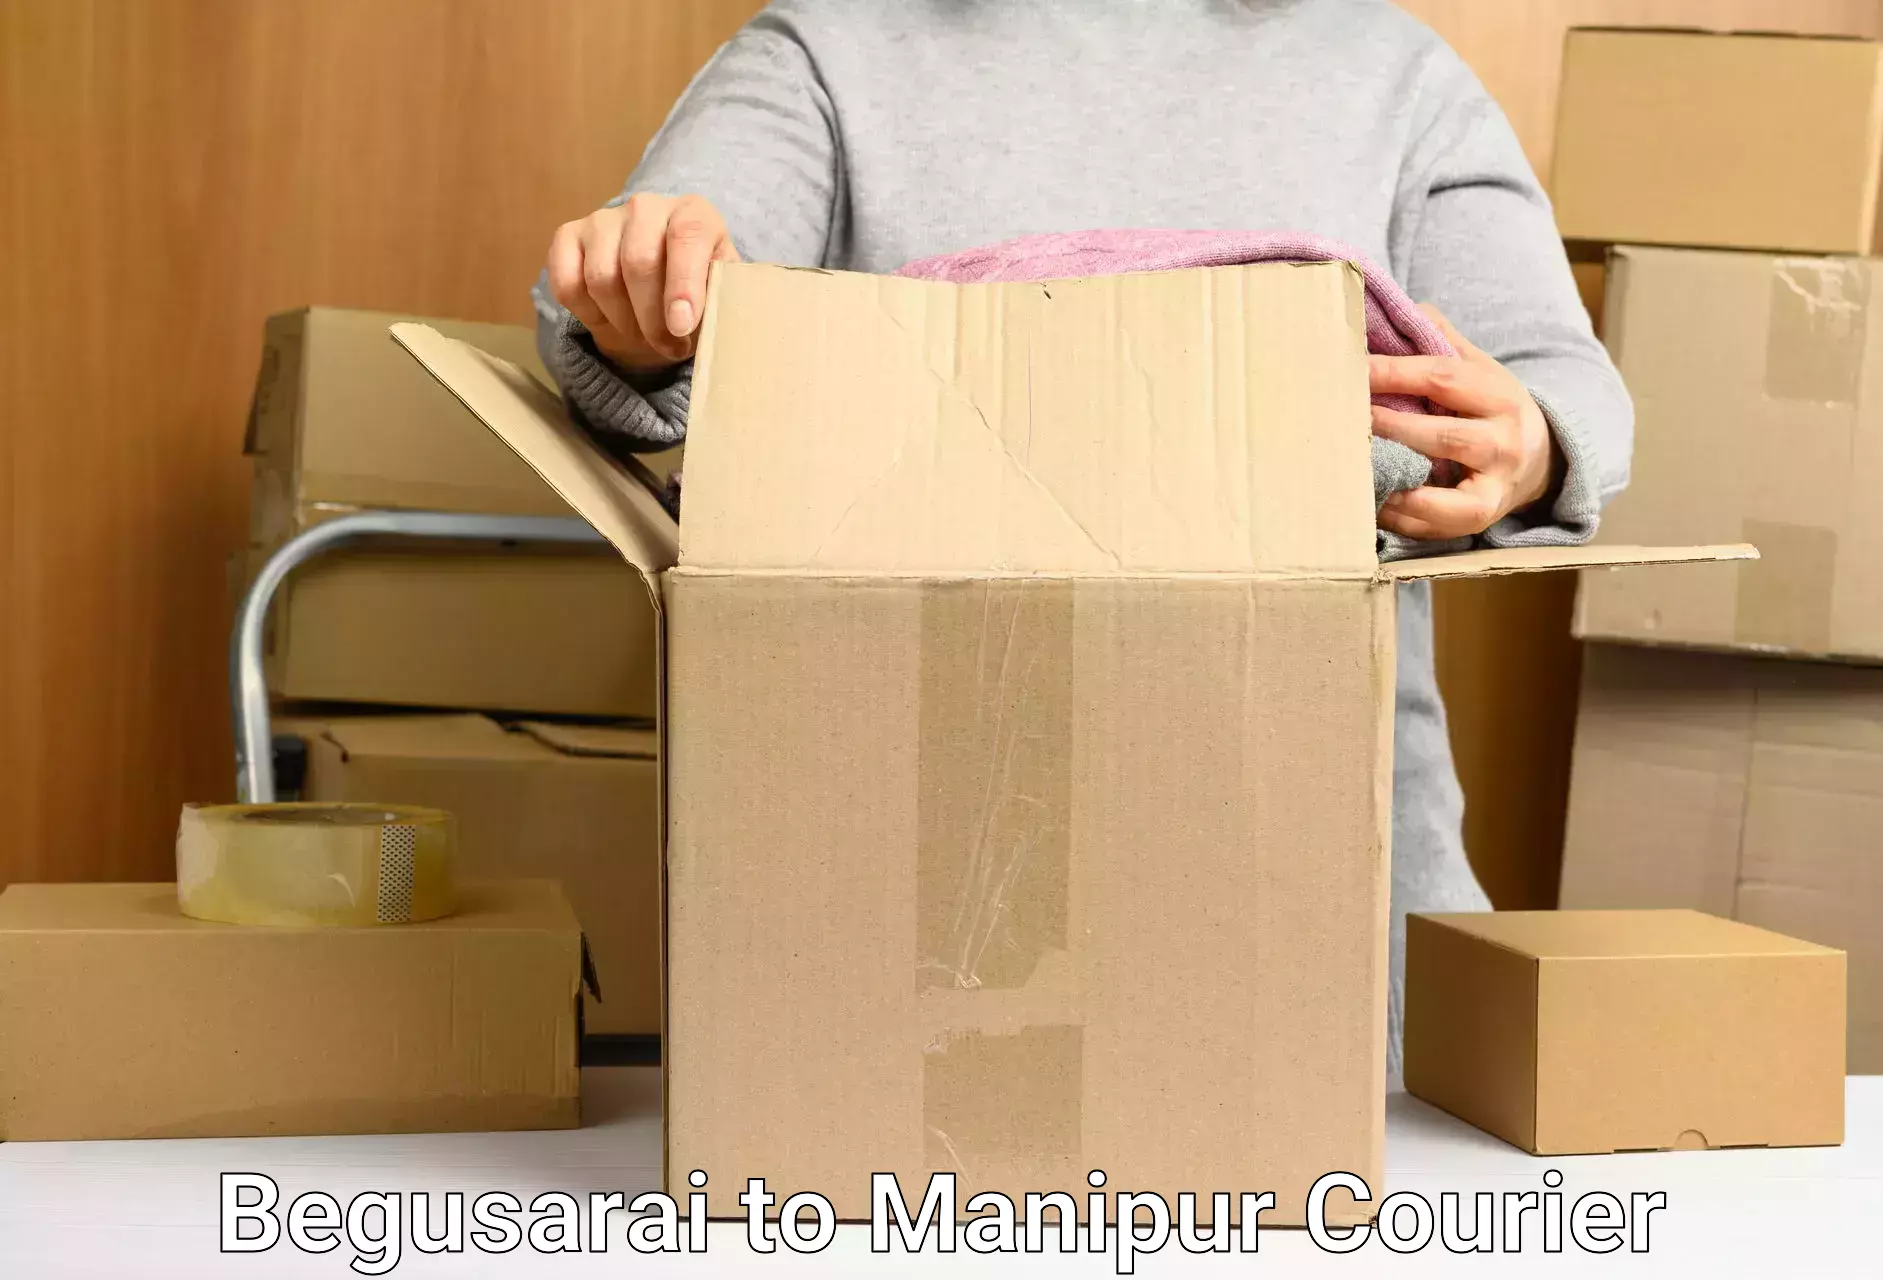 Courier service innovation Begusarai to Manipur